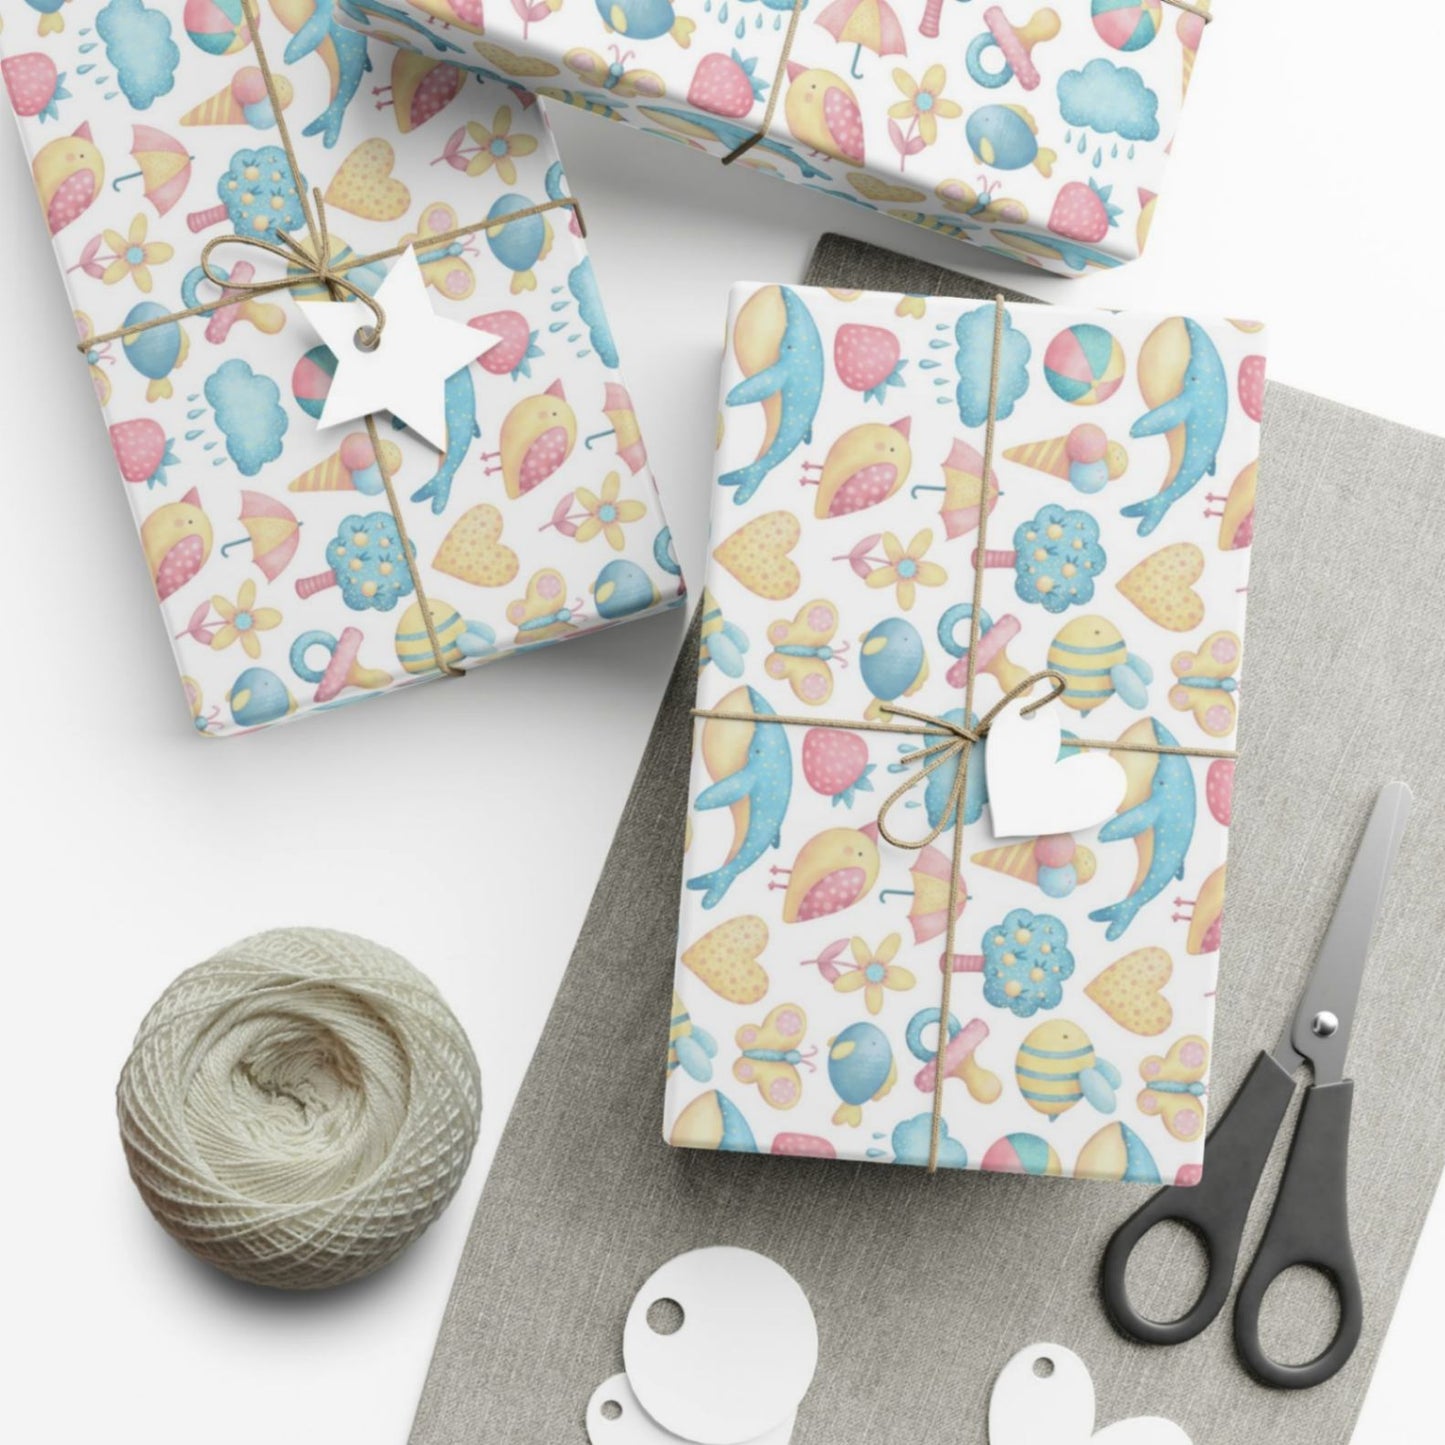 Little Funtimes Wrapping Paper - ZumBuys